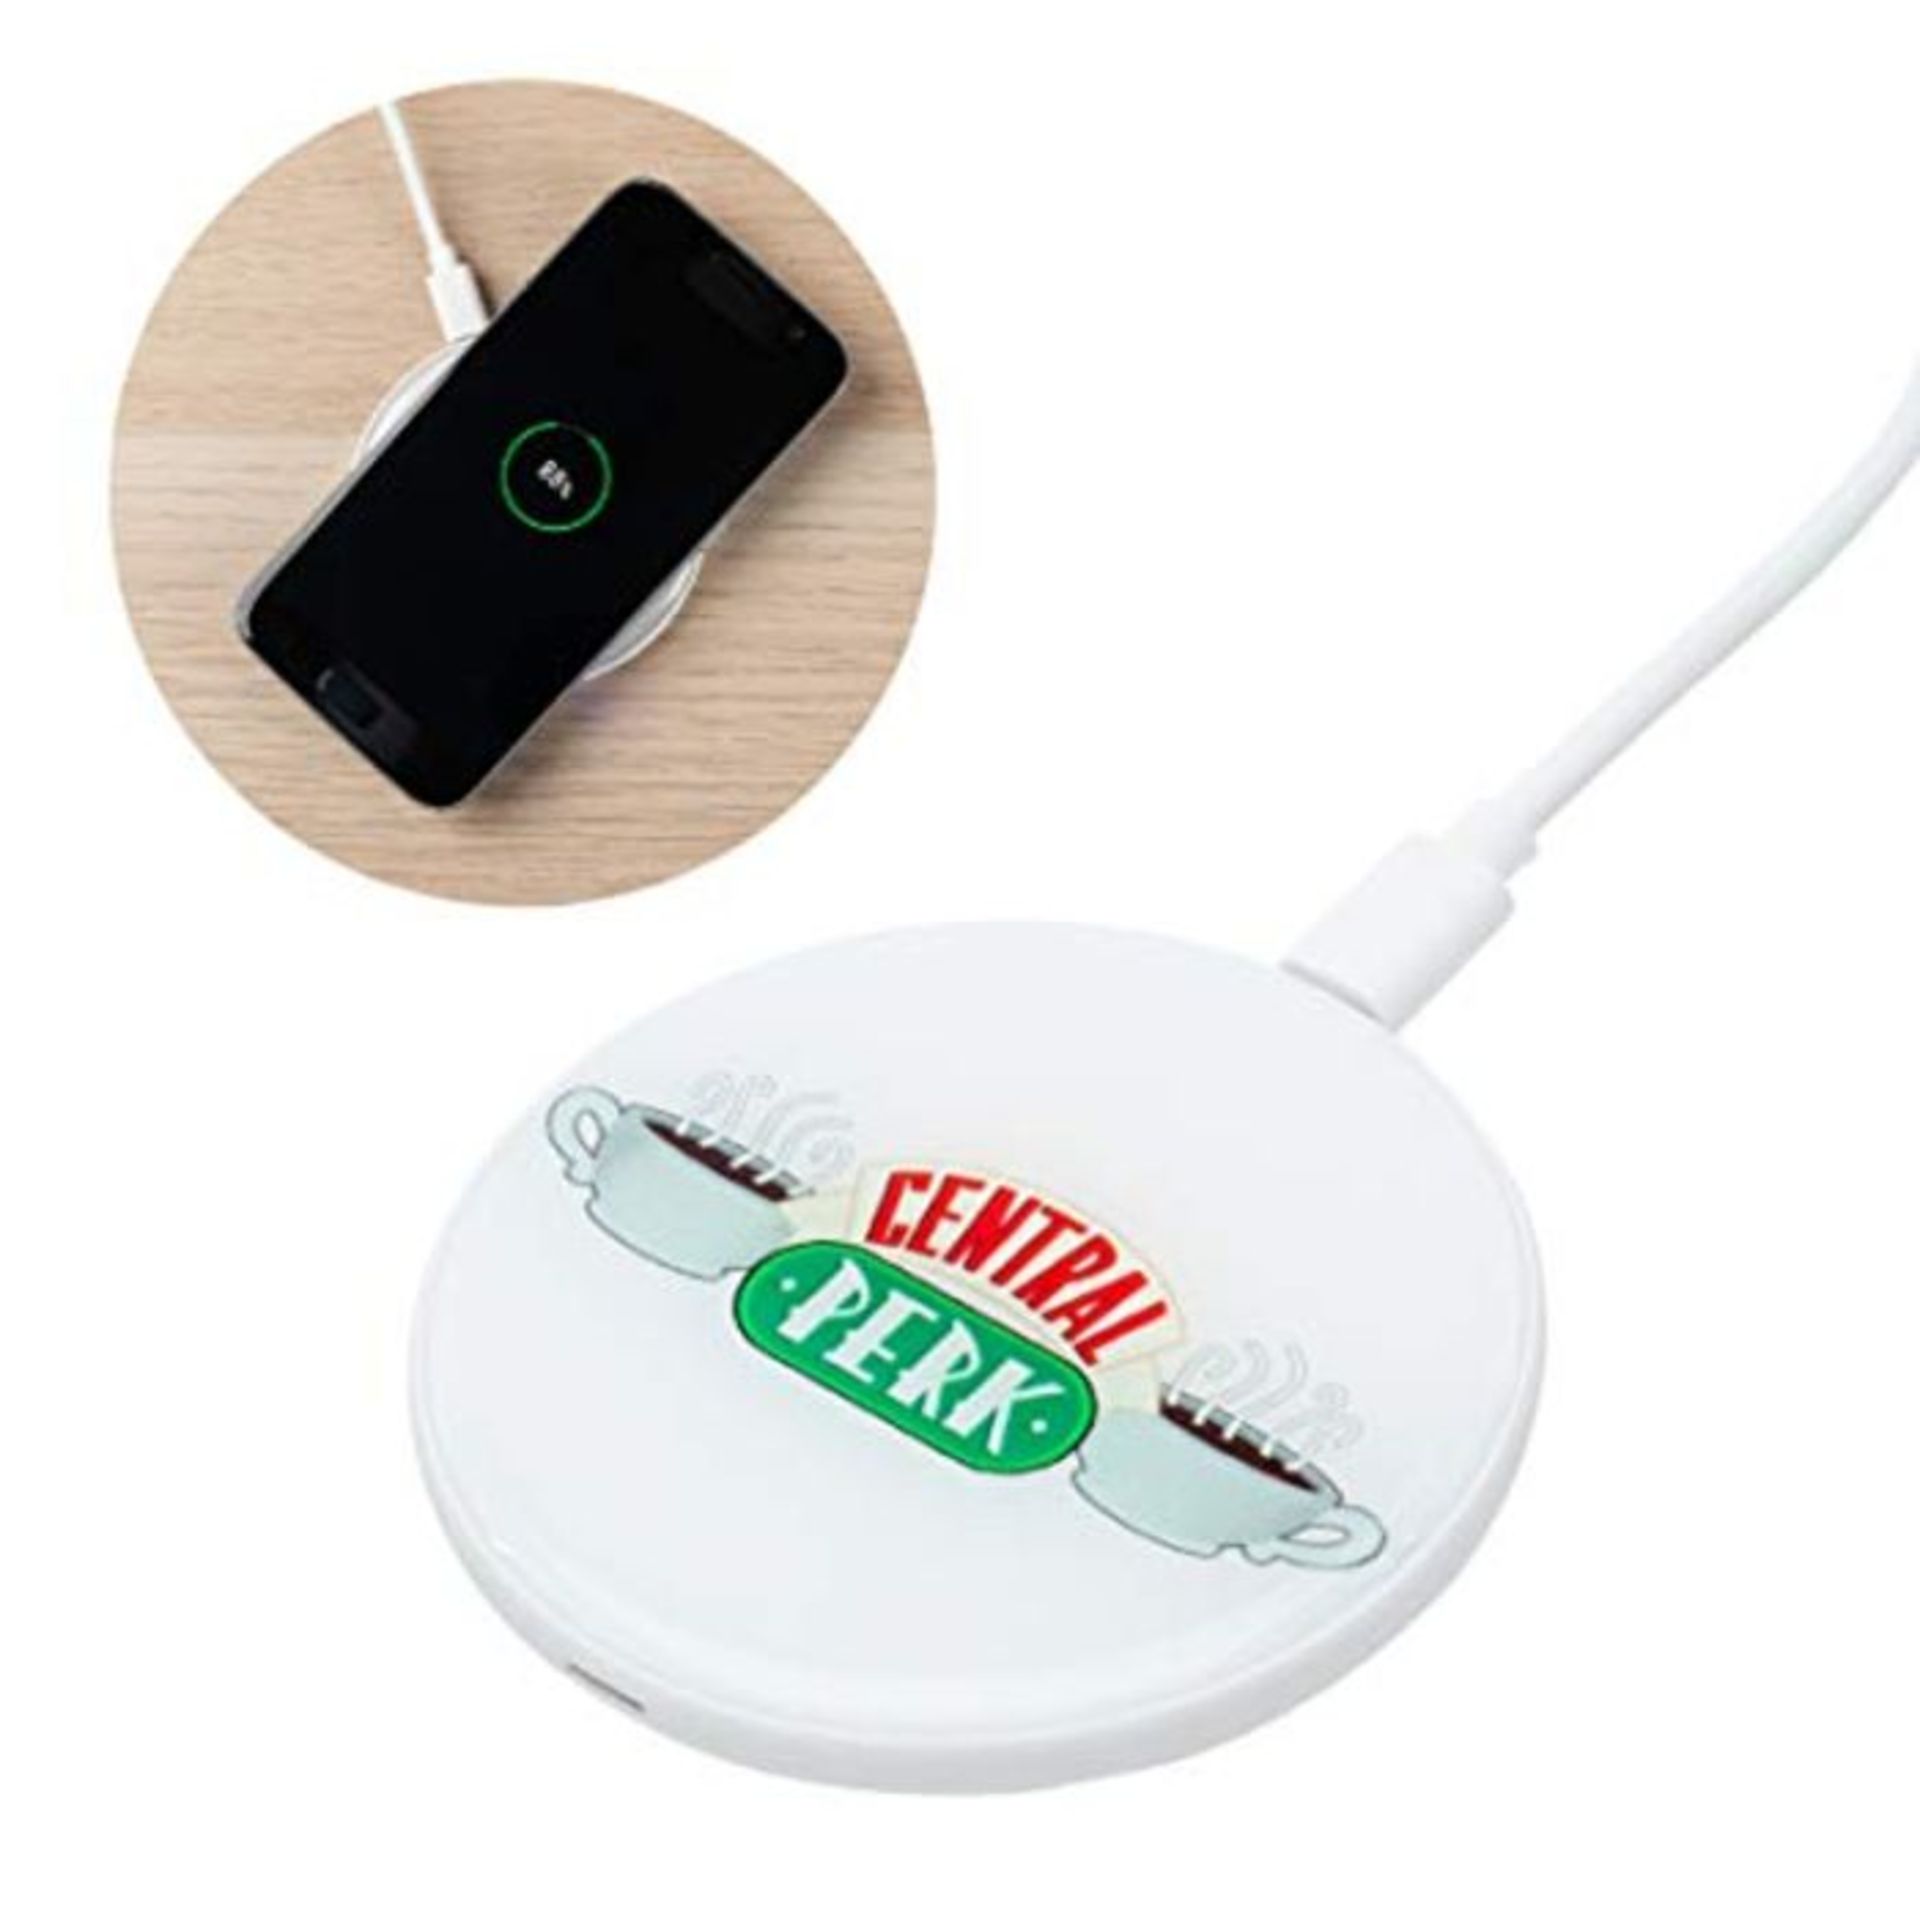 Paladone Central Perk Wireless Charger - Officially Licensed FRIENDS TV Show Merchandi